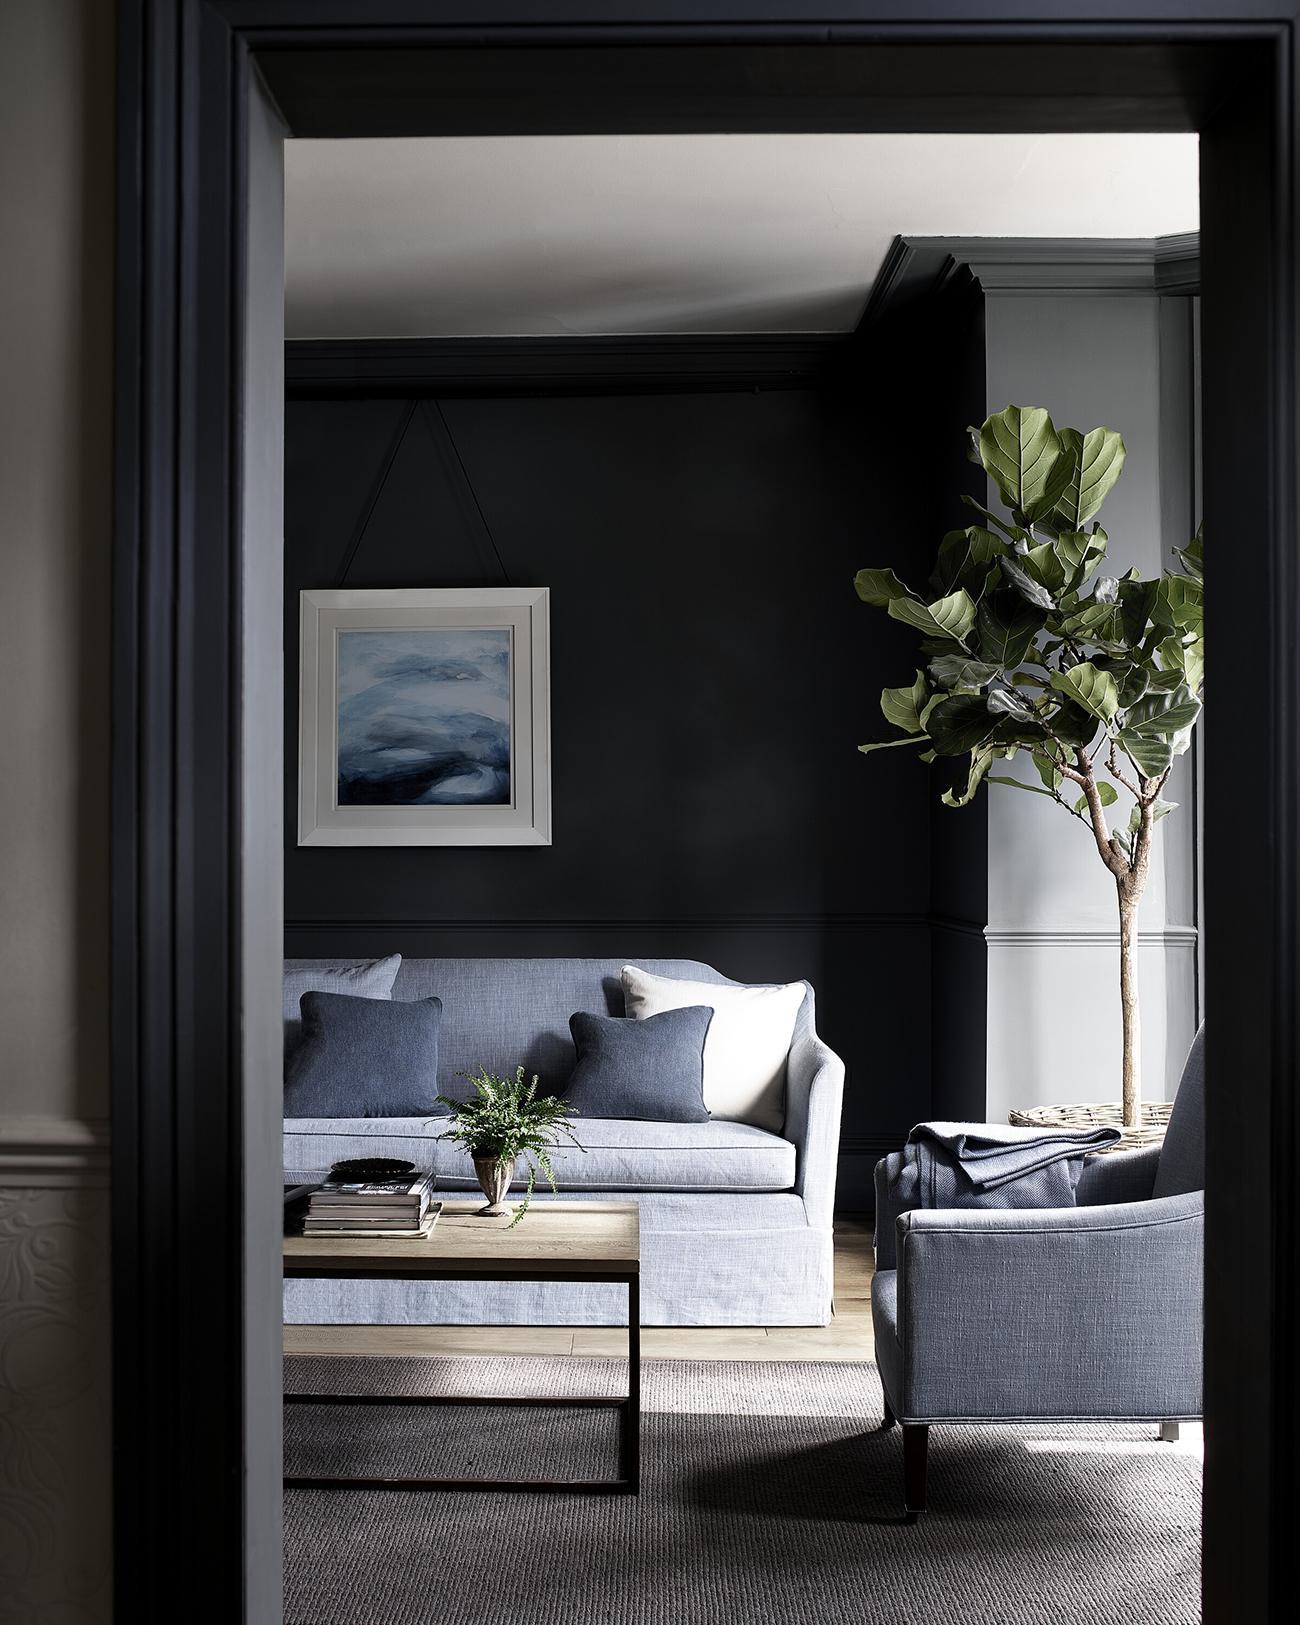 A grey living room idea by Neptune with grey-blue upholstered sofas, framed wall art and large houseplant